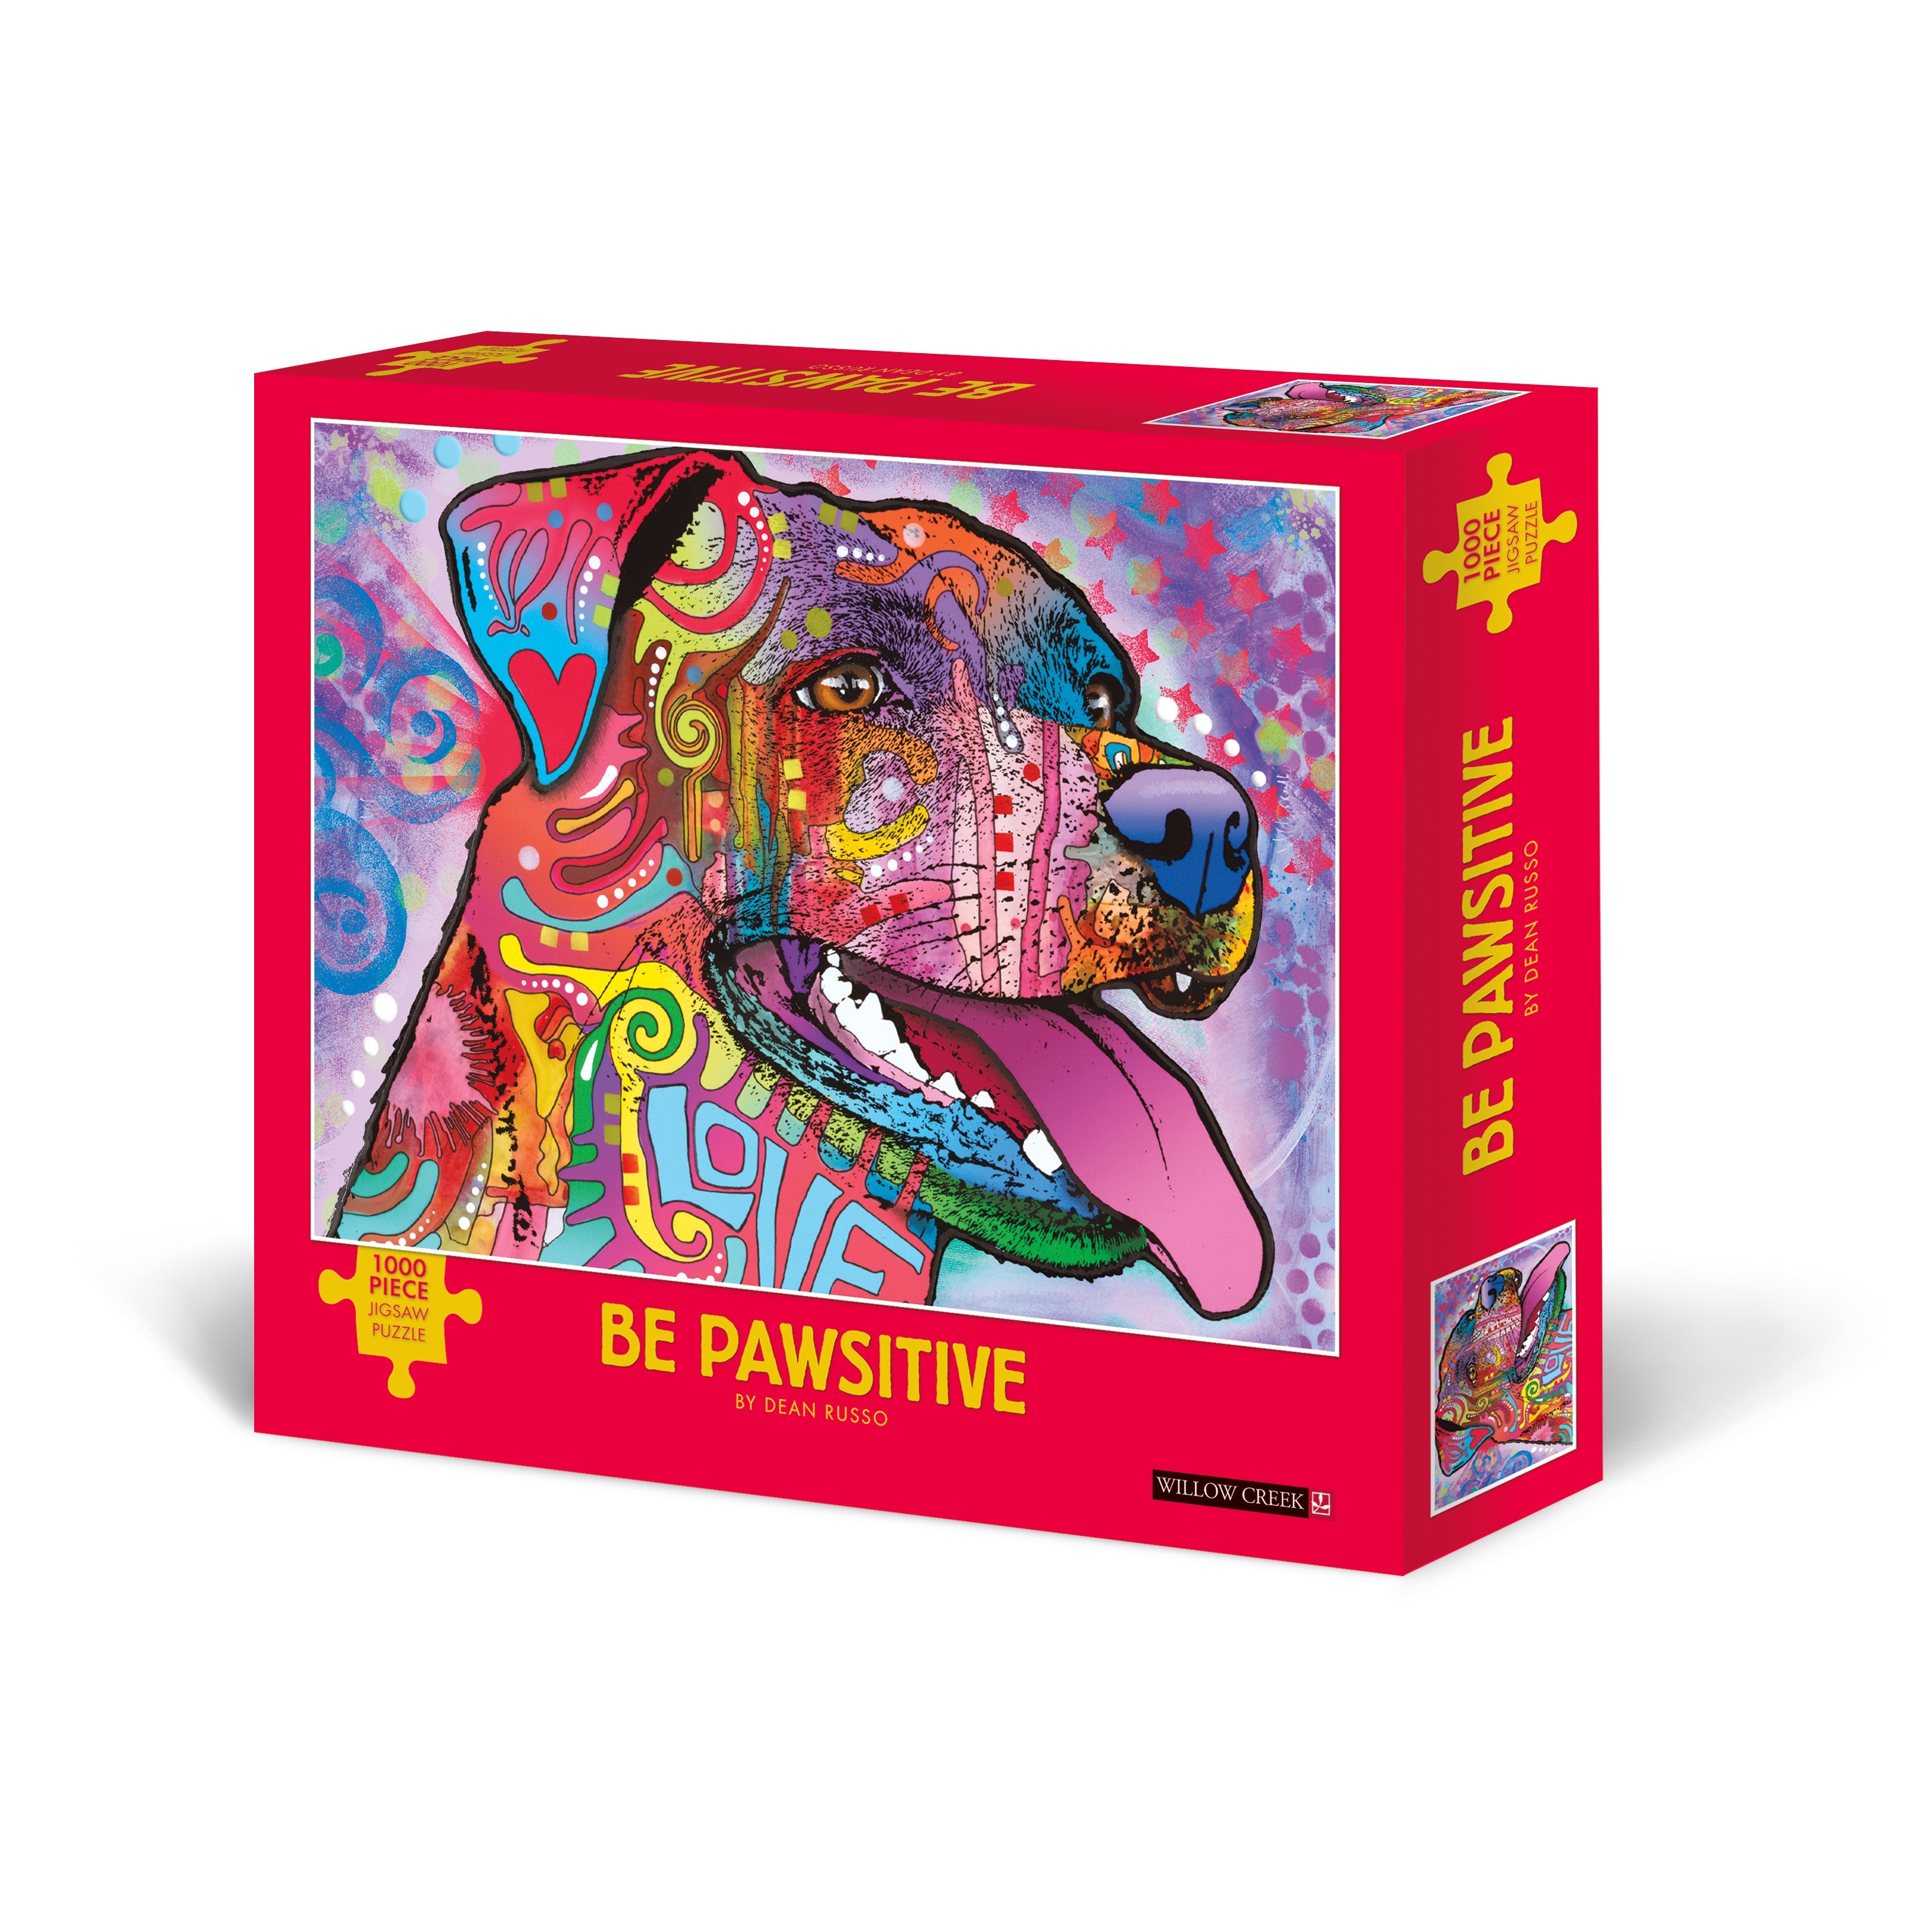 Be Pawsitive 1000 Piece - Jigsaw Puzzle